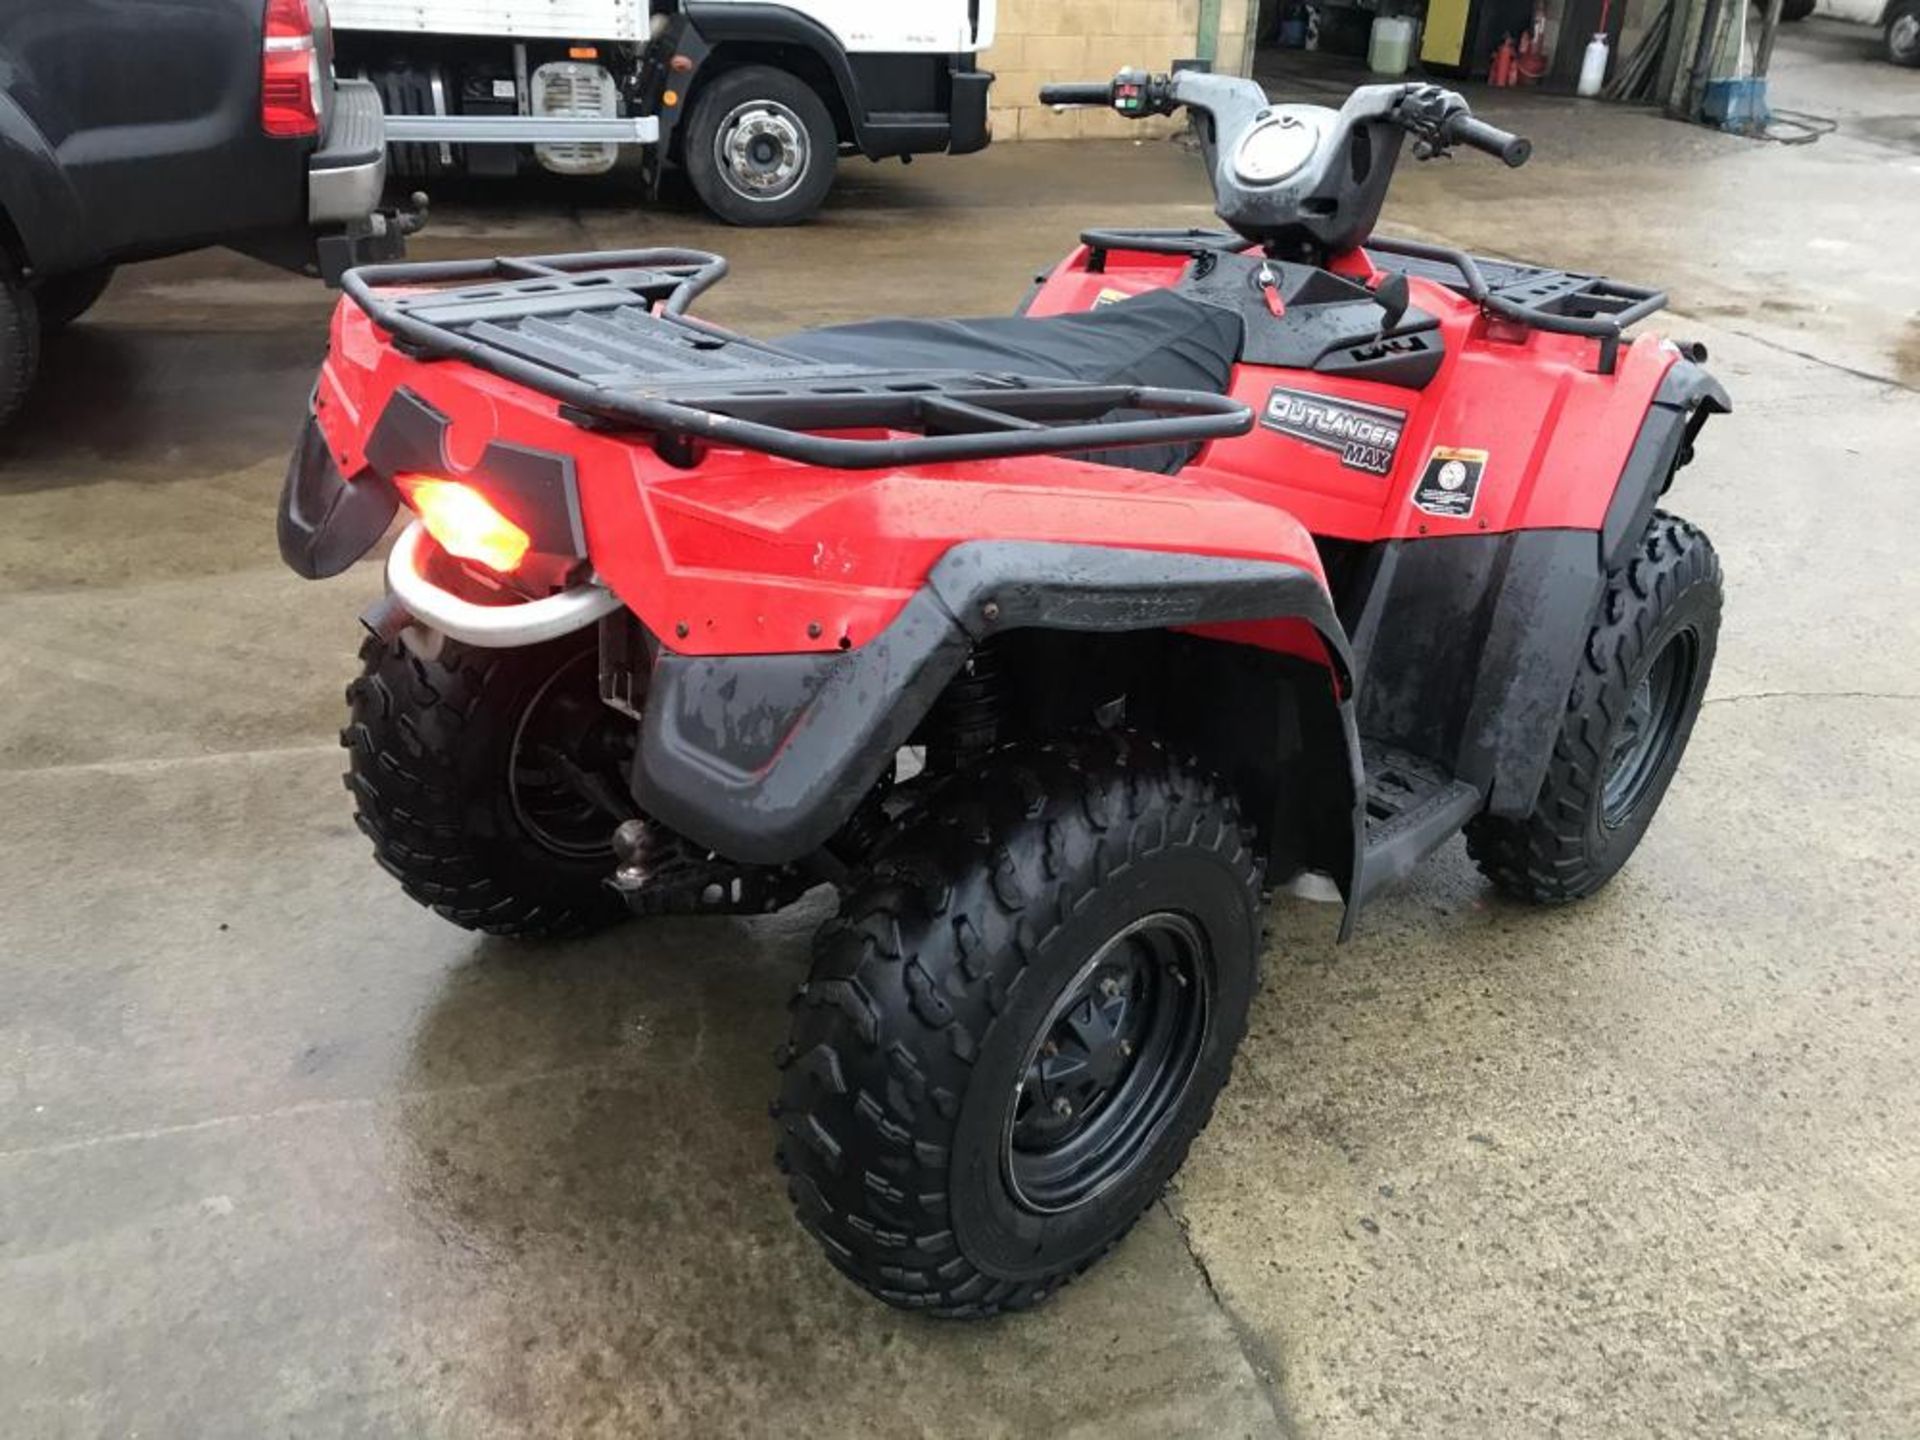 2013 CAN-AM 400 QUAD BIKE, RUNS, WORKS AND DRIVES *PLUS VAT* - Image 7 of 10